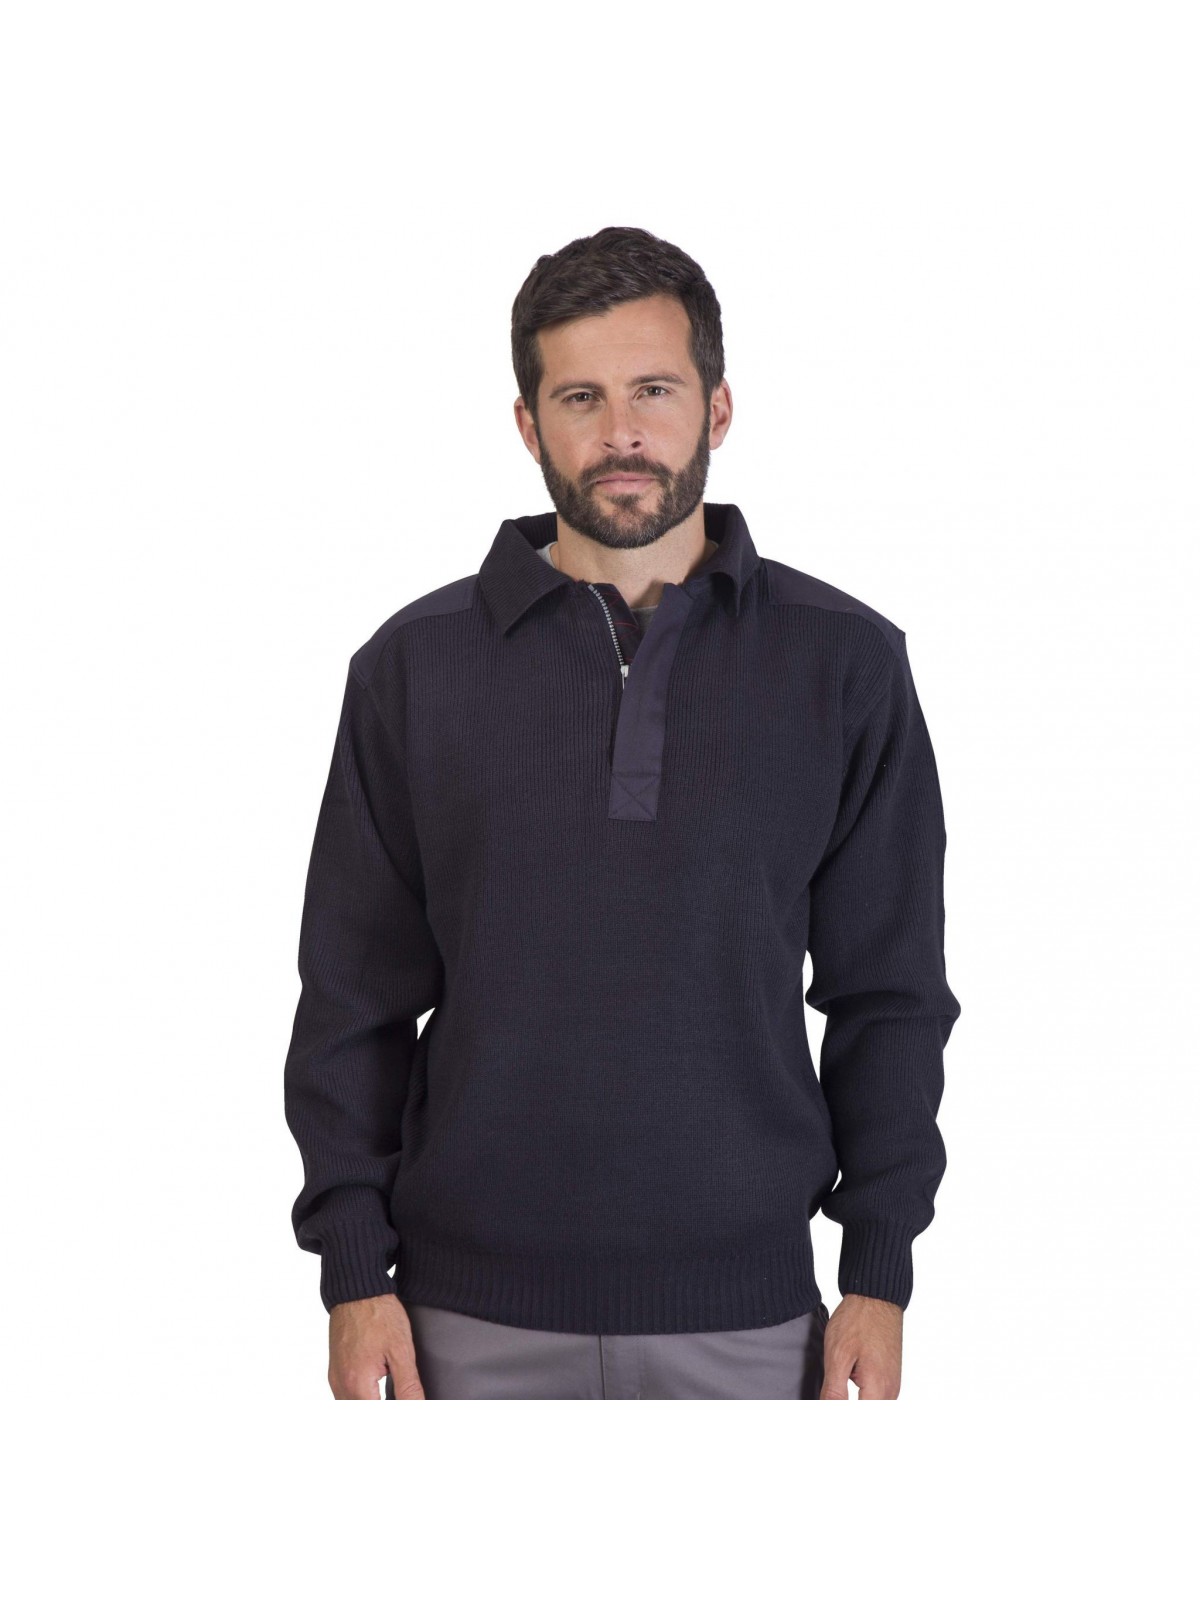 32-473 Pull-over col polo Worky personnalisé